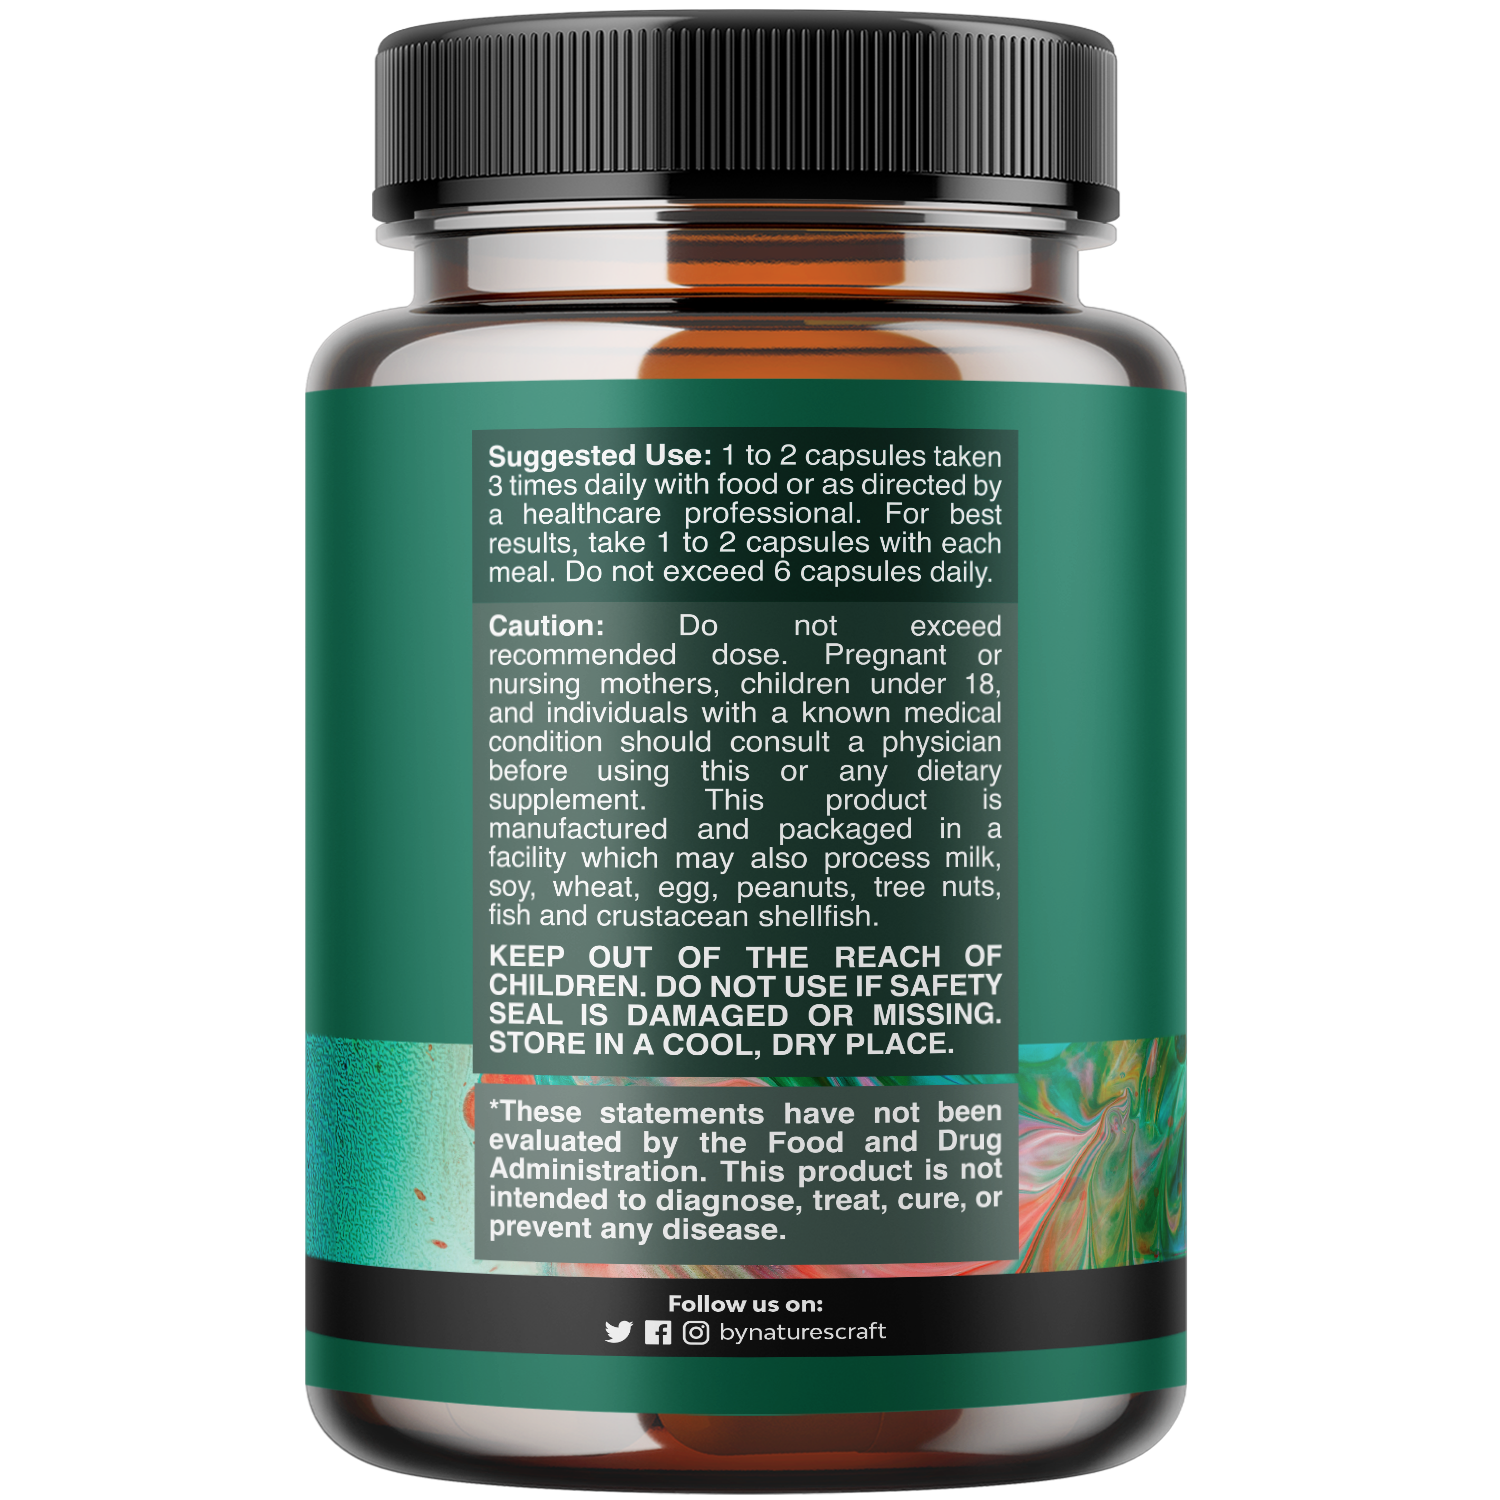 Pancreatic Enzymes - 60 Capsules